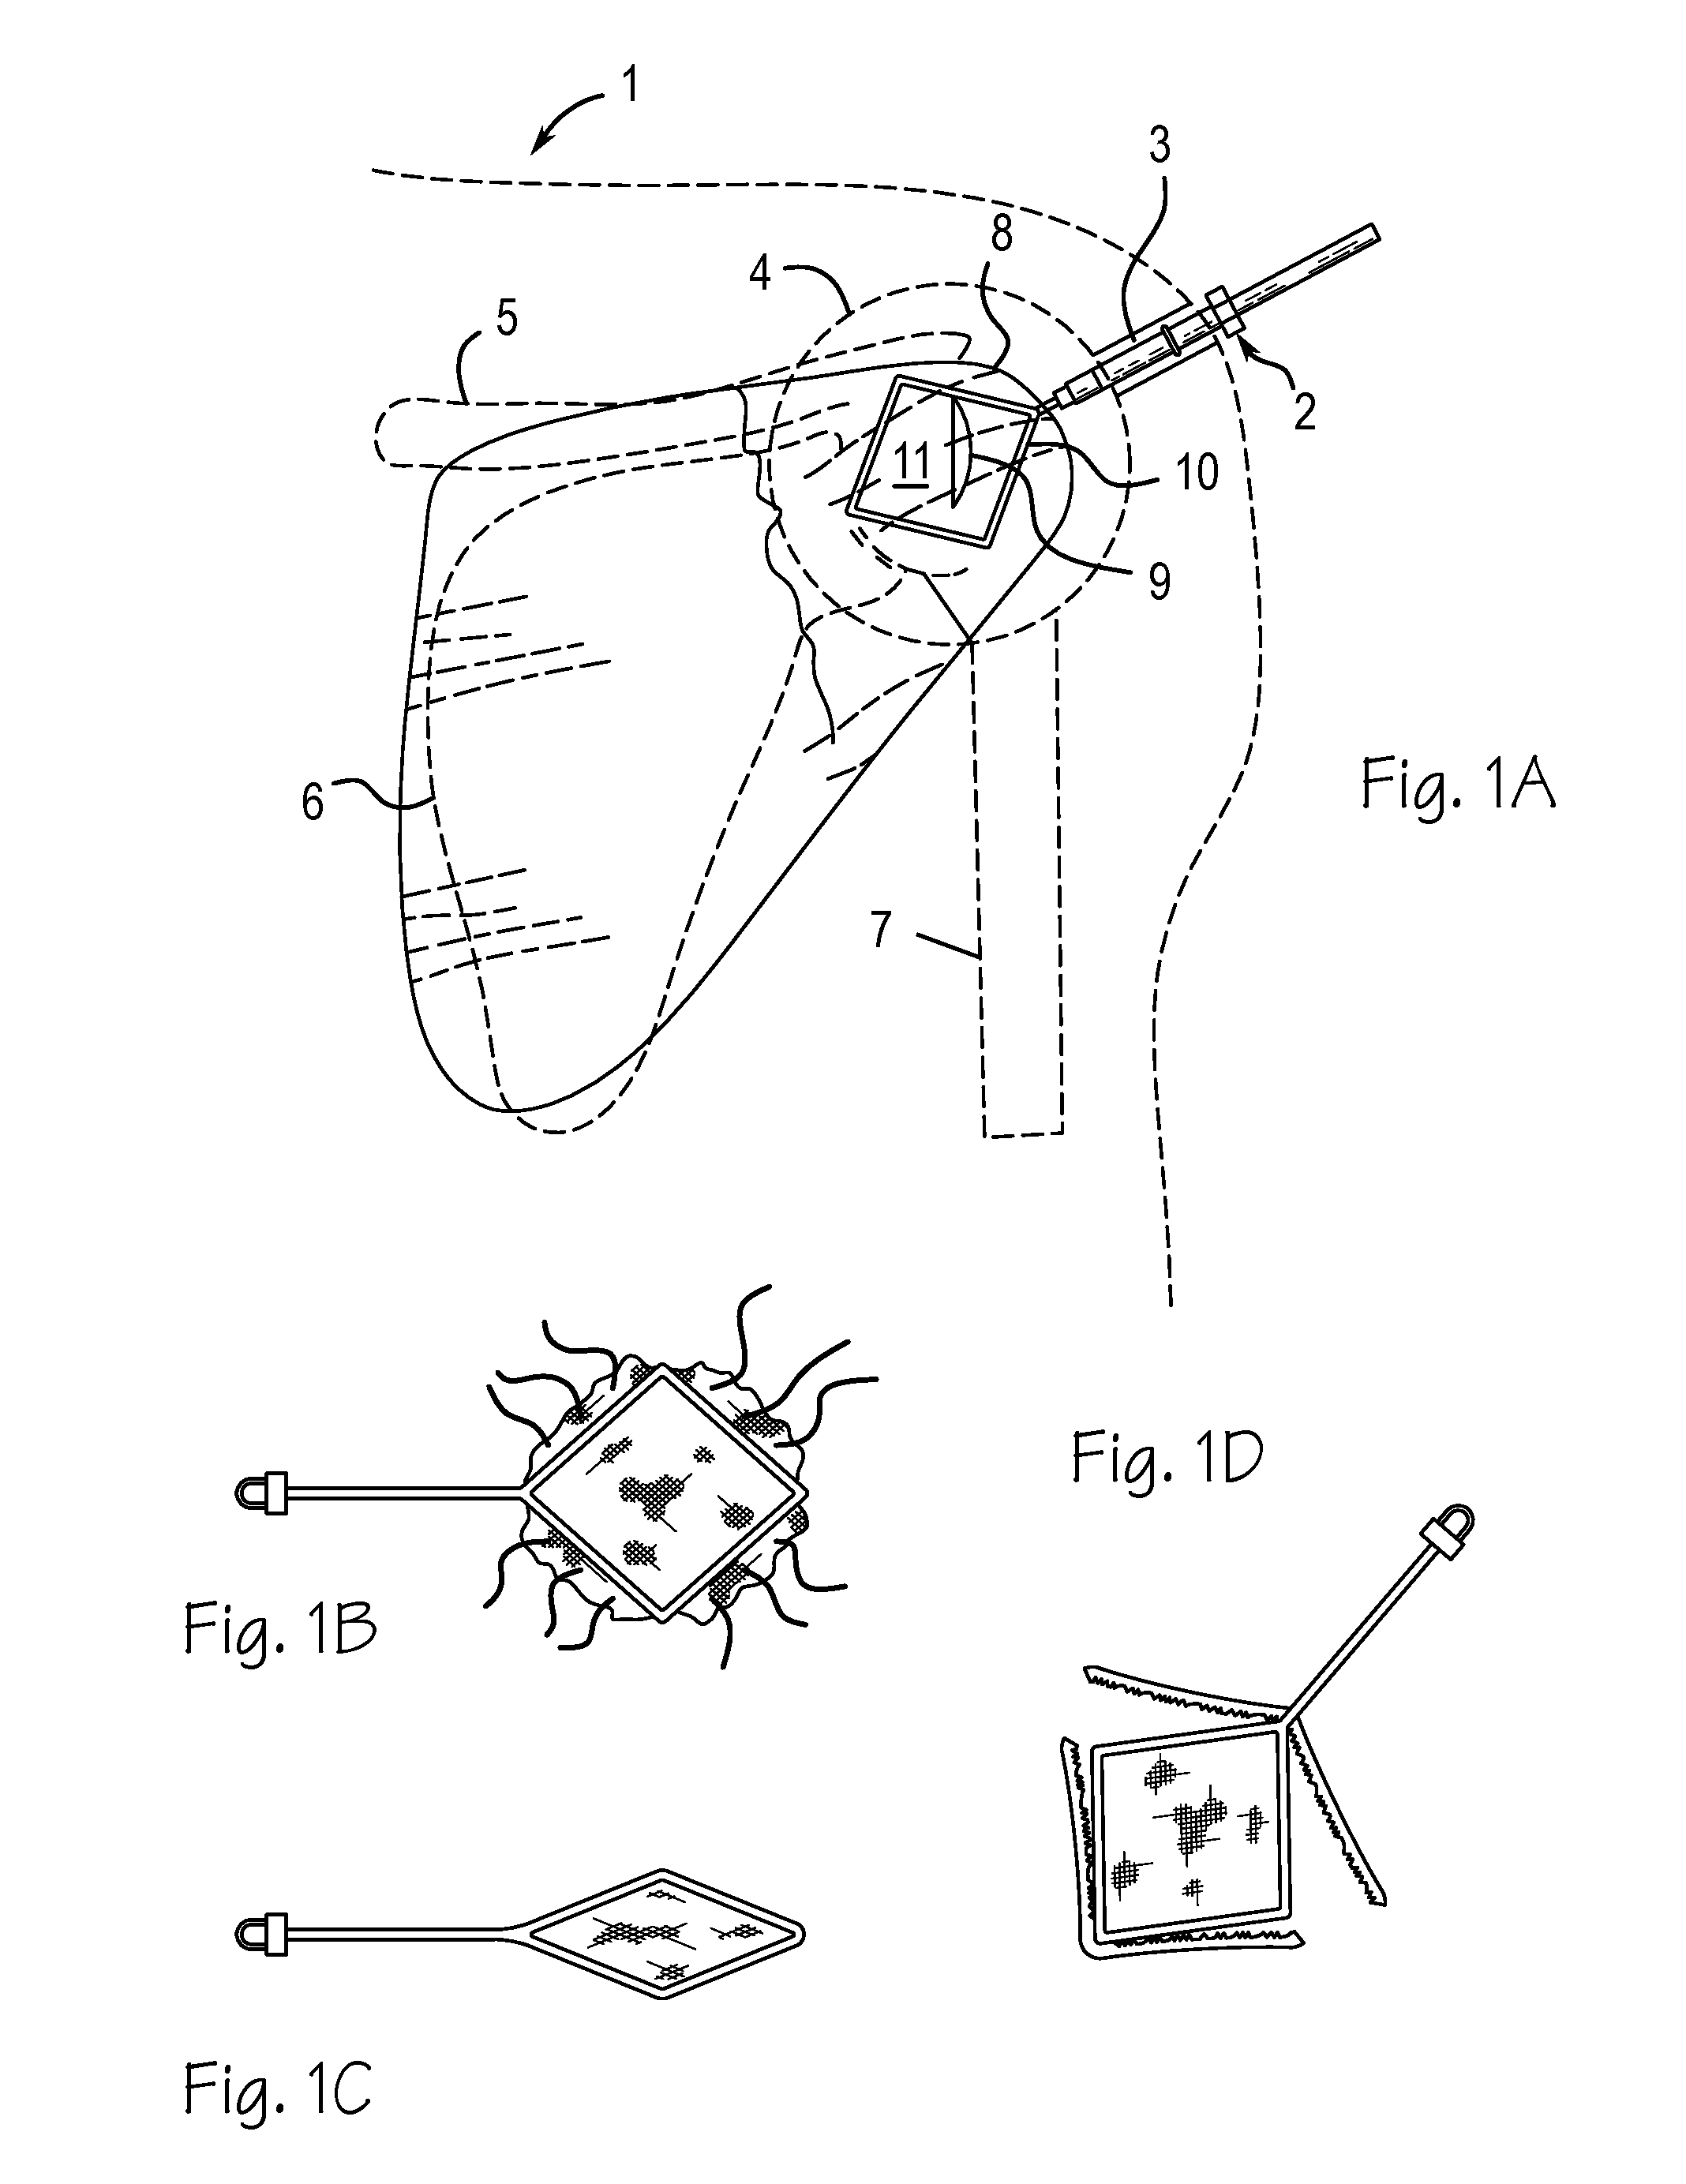 Method and devices for implantation of biologic constructs